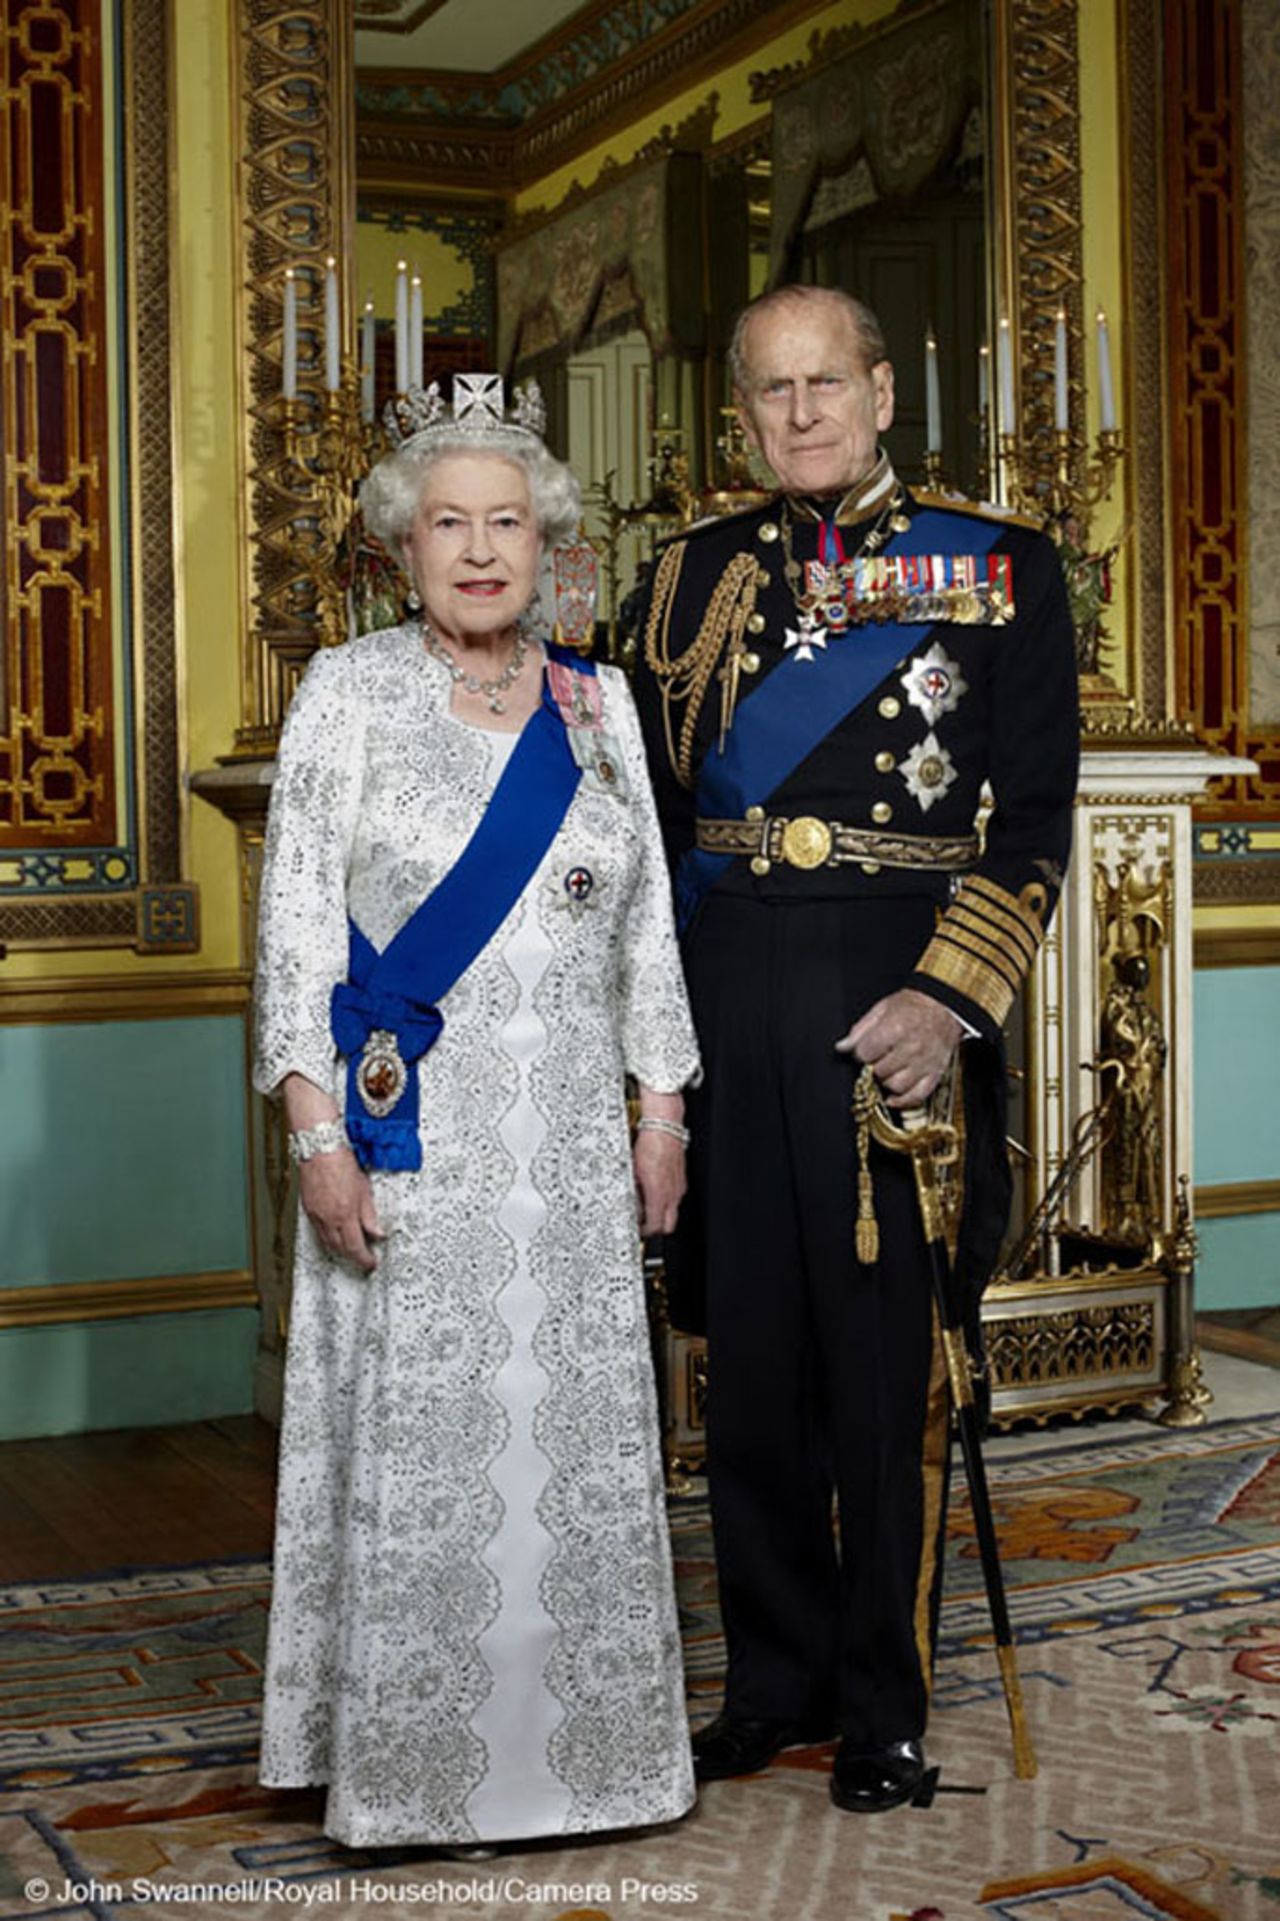 This photograph of the queen and the Duke of Edinburgh was released by Buckingham Palace to mark the Diamond Jubilee.